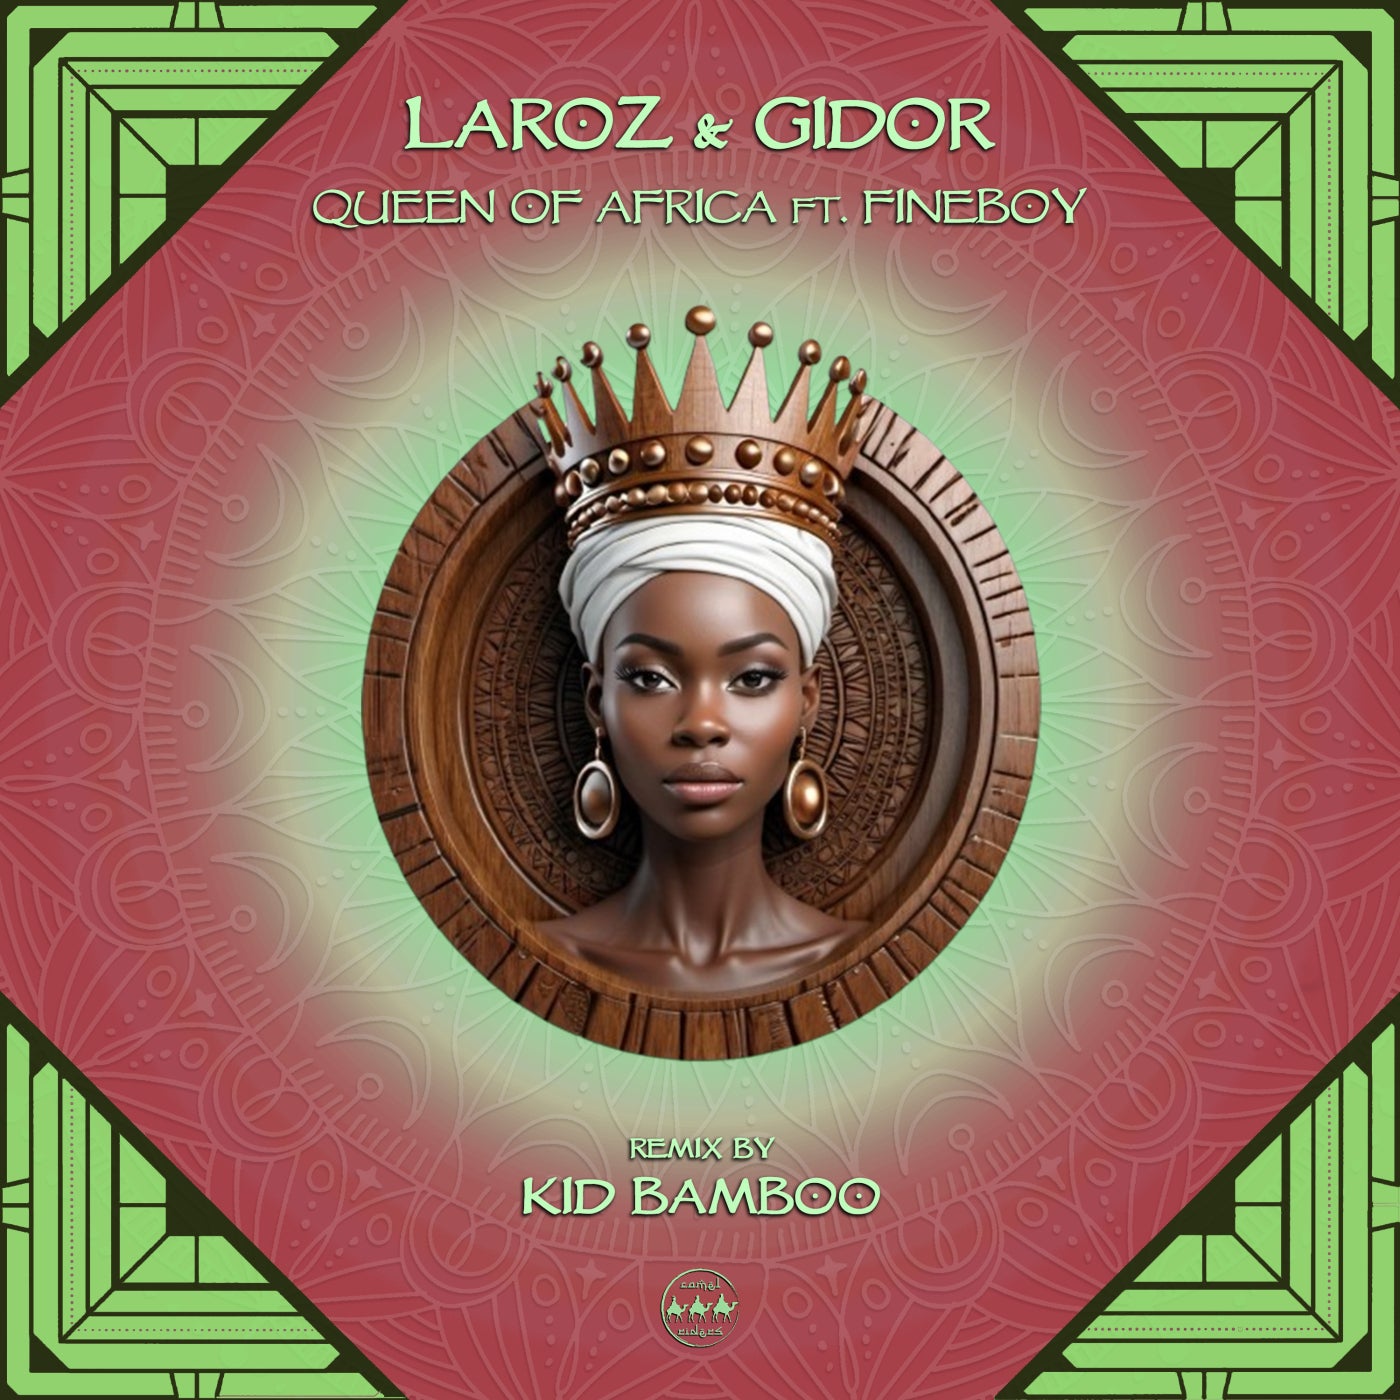 Cover - Laroz, Gidor - Queen of Africa feat. Fineboy (Kid Bamboo Remix)